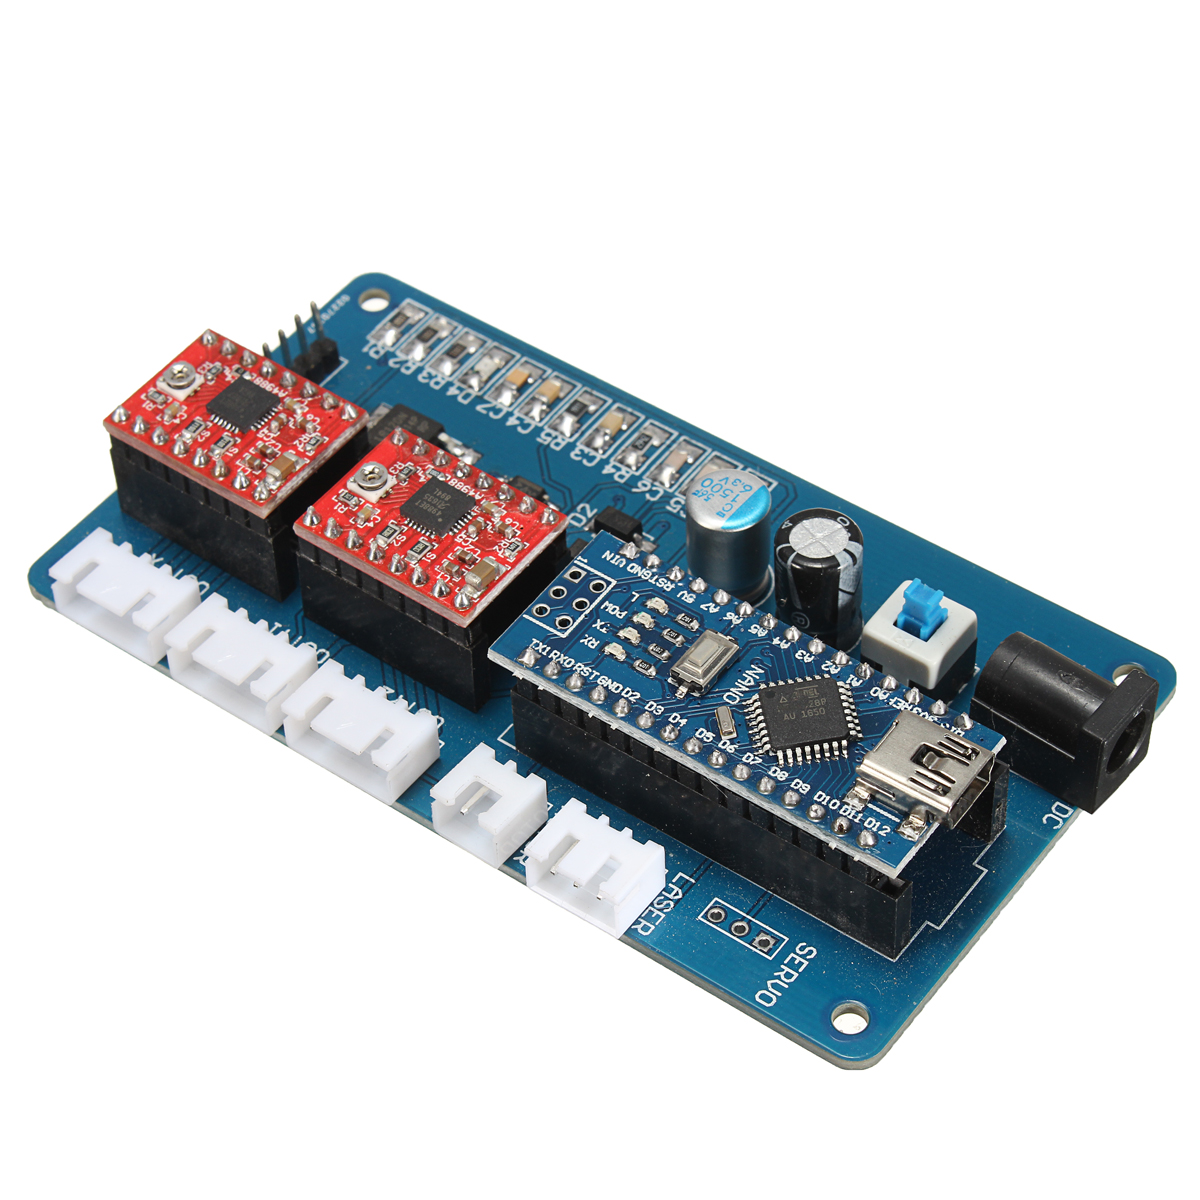 2 Axis GRBL Control Panel Board For DIY Laser Engraving Machine Benbox USB Stepper Driver Board 15